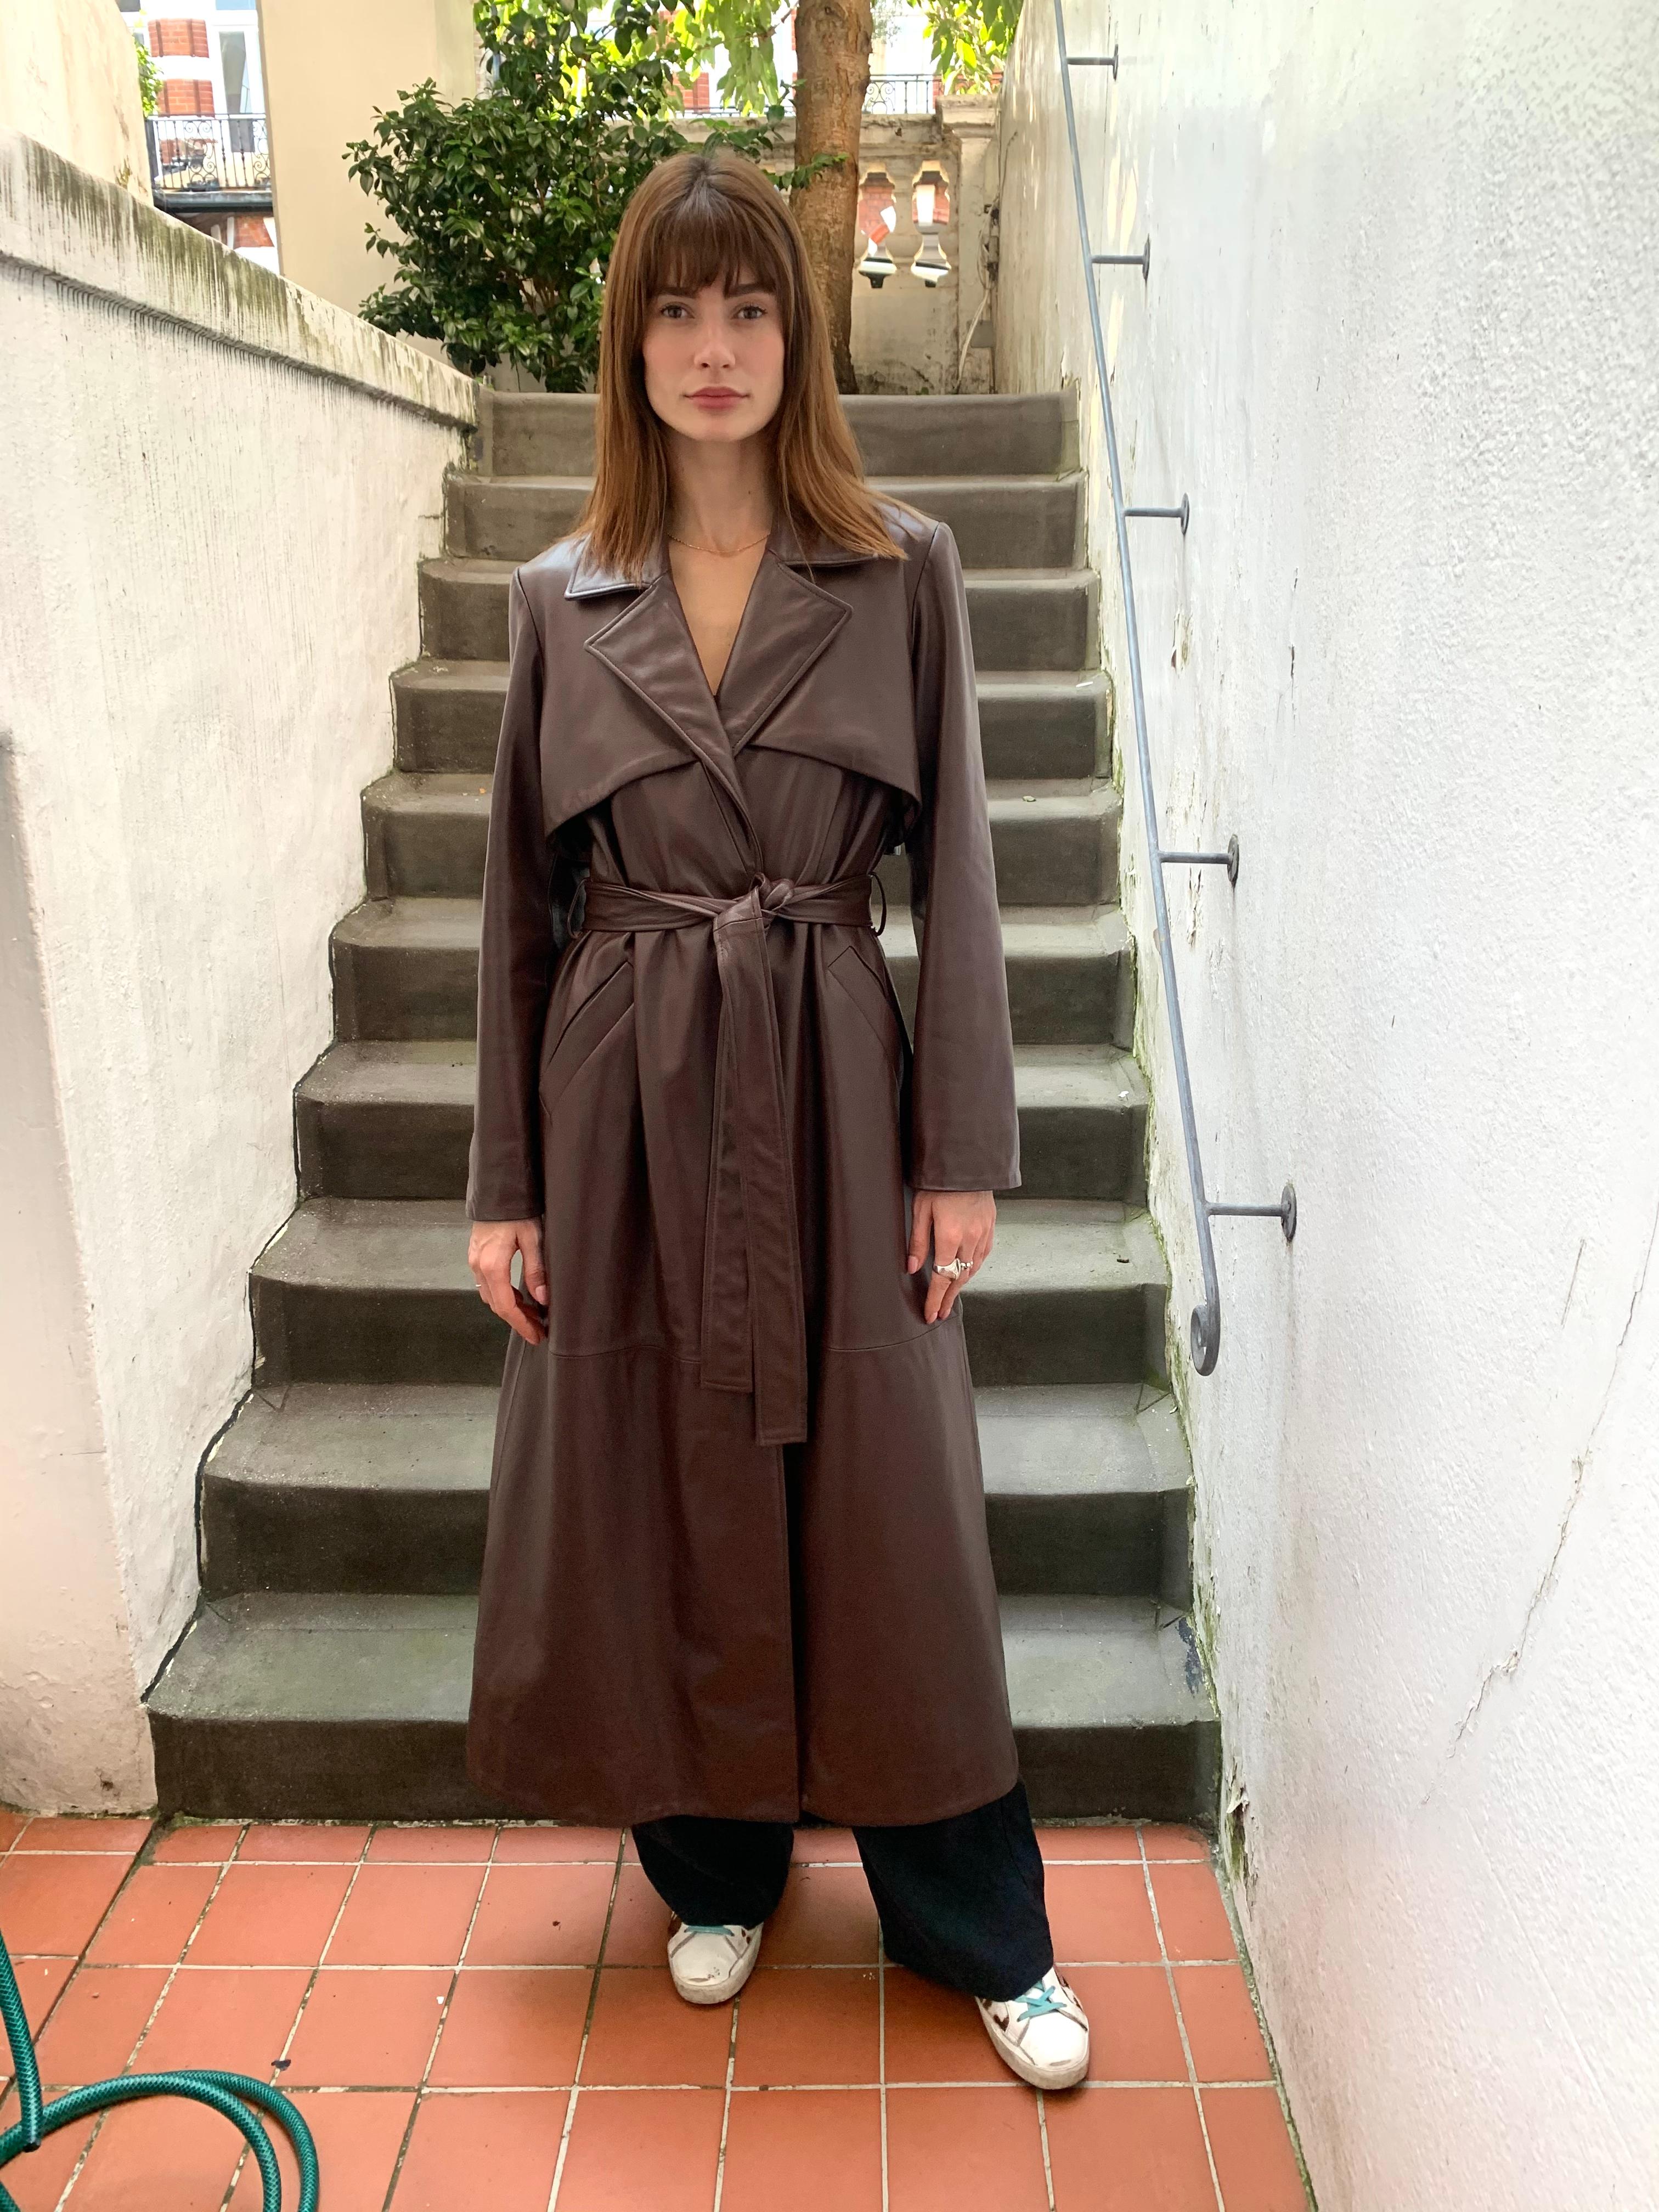 Black Verheyen London Leather Trench Coat in Chocolate Brown - Size uk 16 For Sale